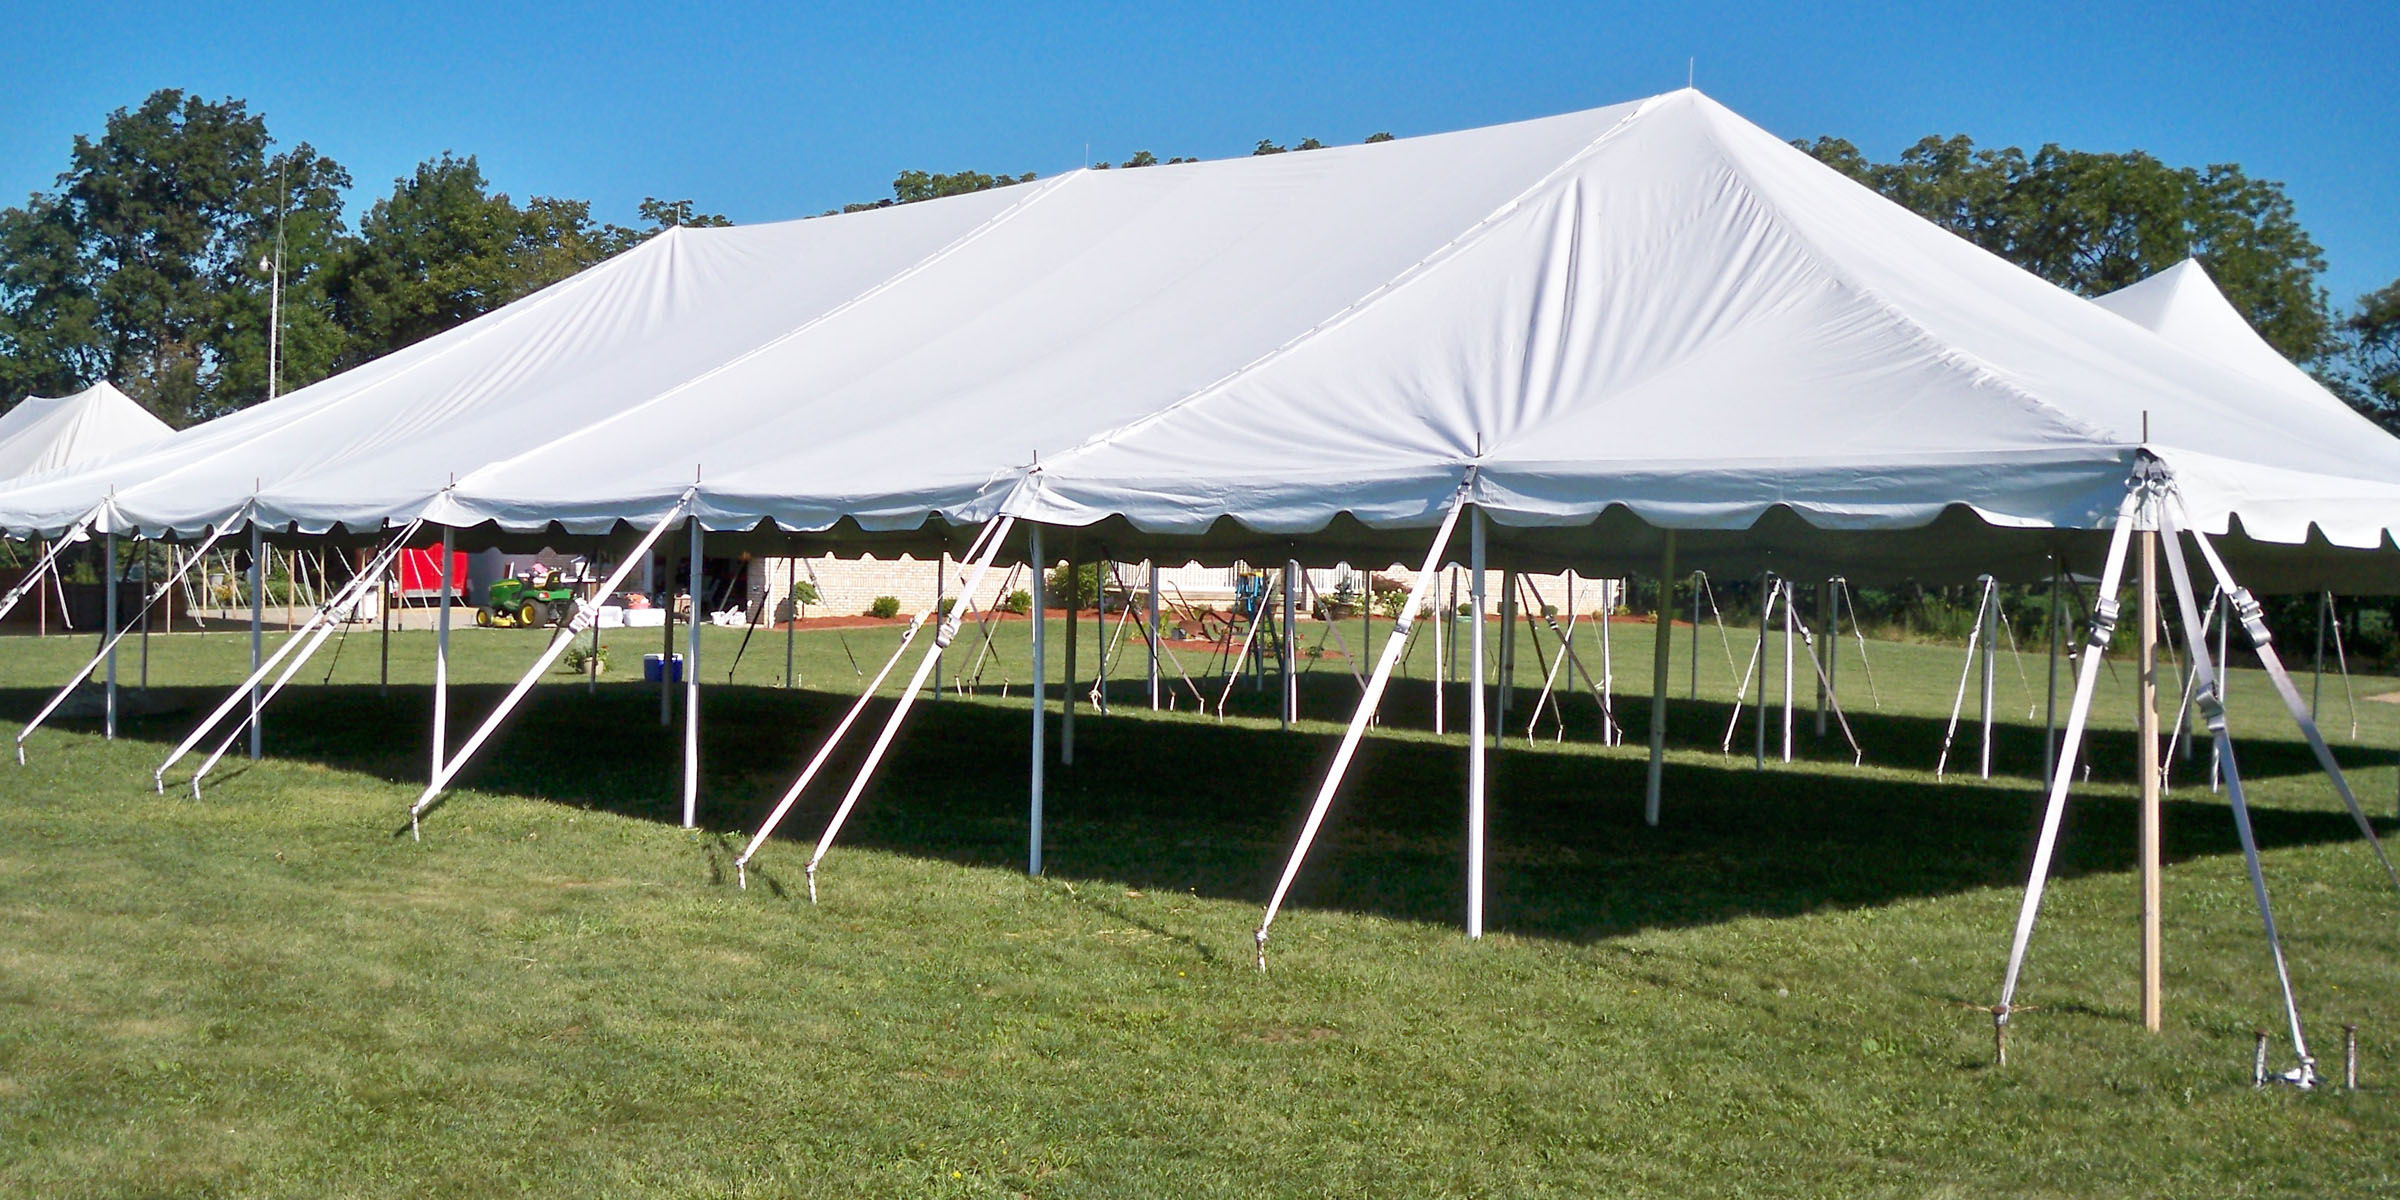 Myers Rental | Monroeville, OH | Tents